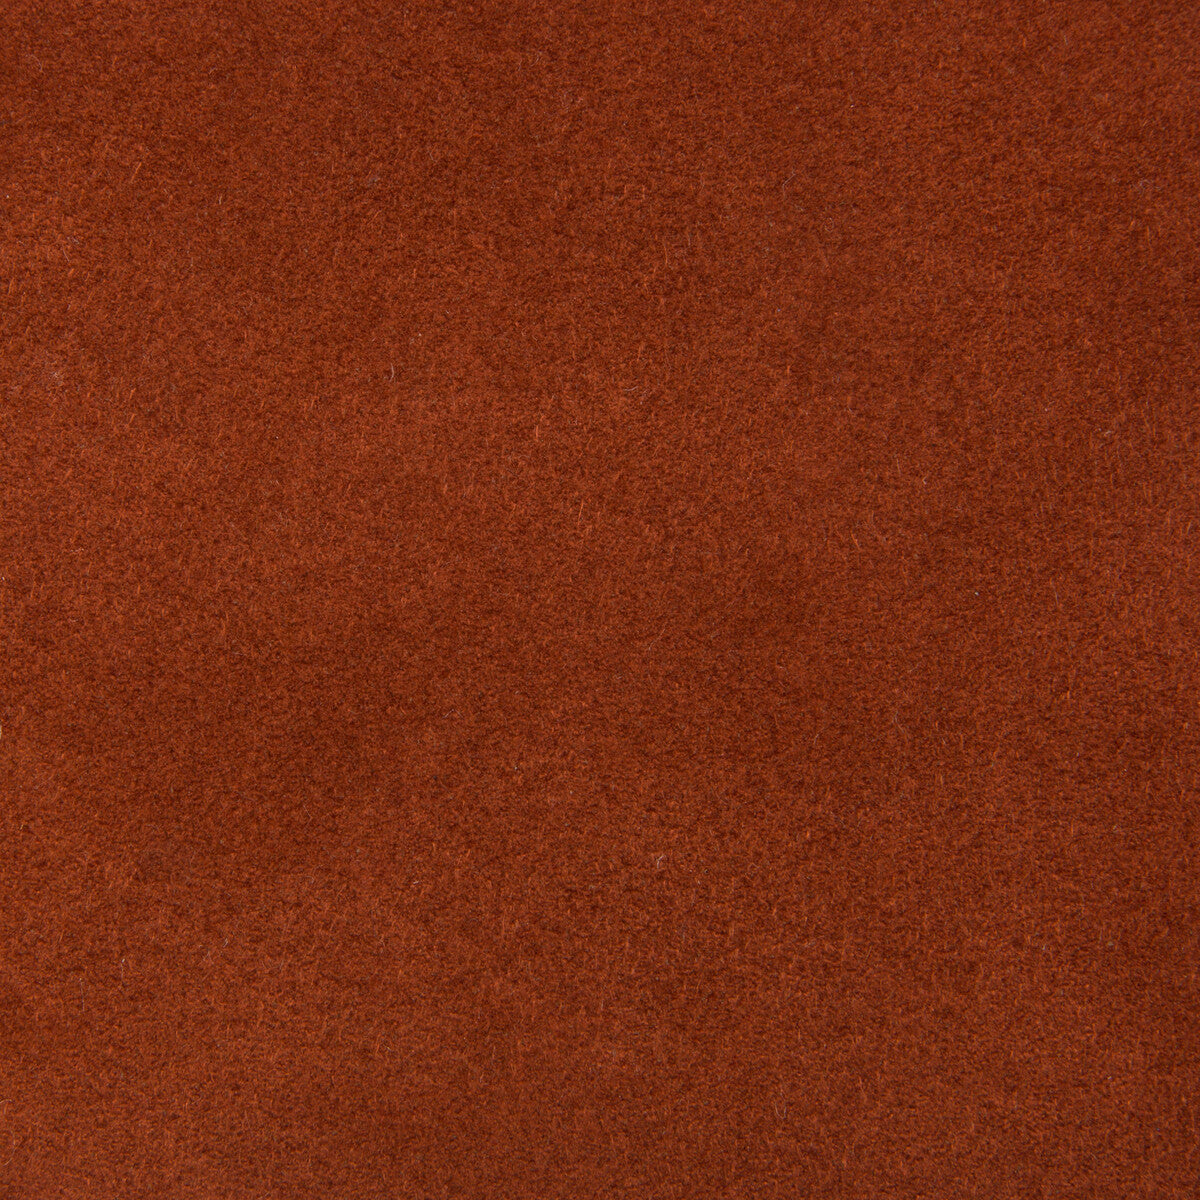 Ultrasuede fabric in spice color - pattern ULTRASUEDE.24.0 - by Kravet Design in the Ultrasuede collection